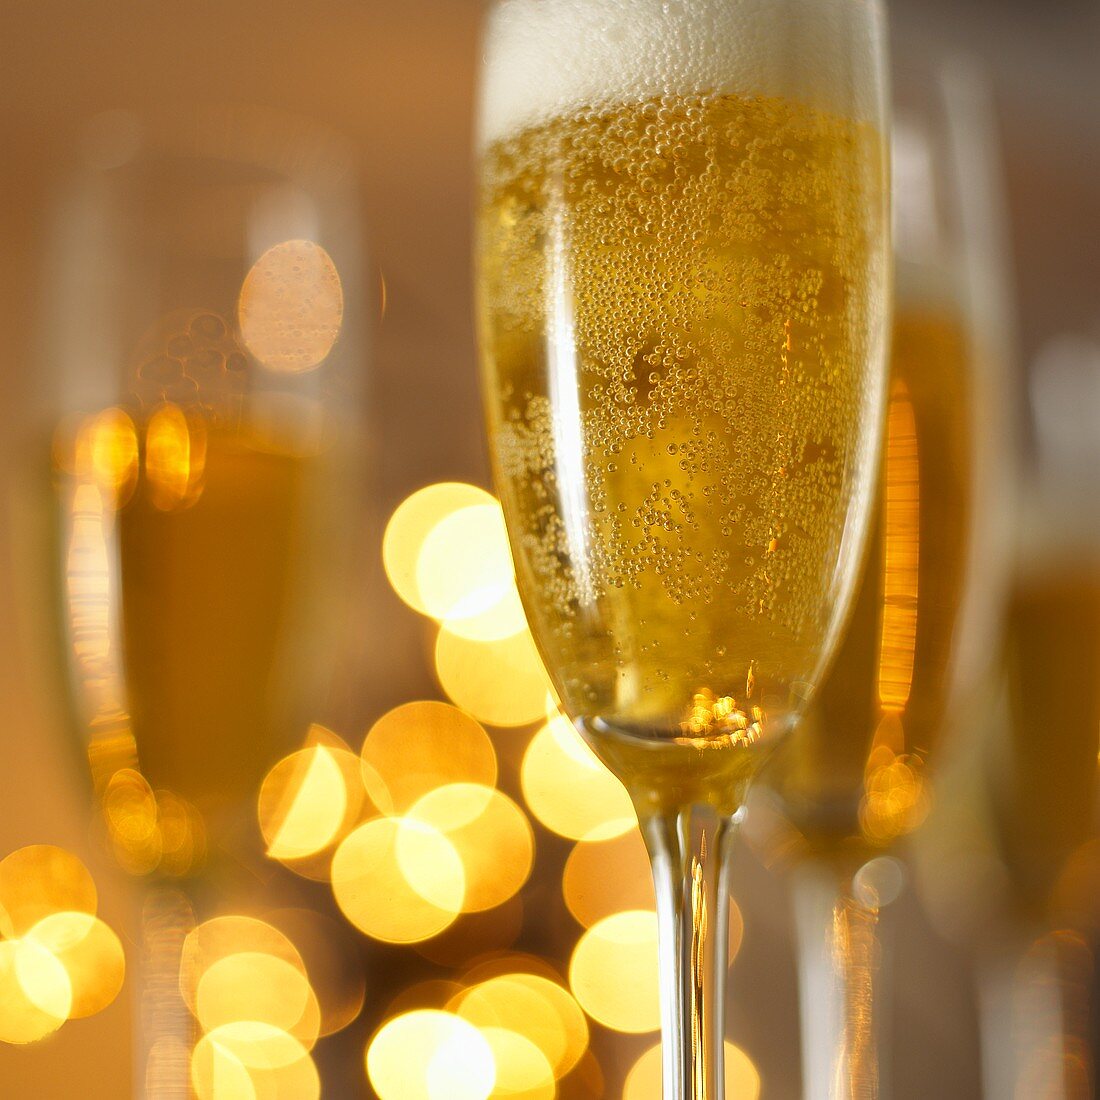 A glass of champagne in festive light